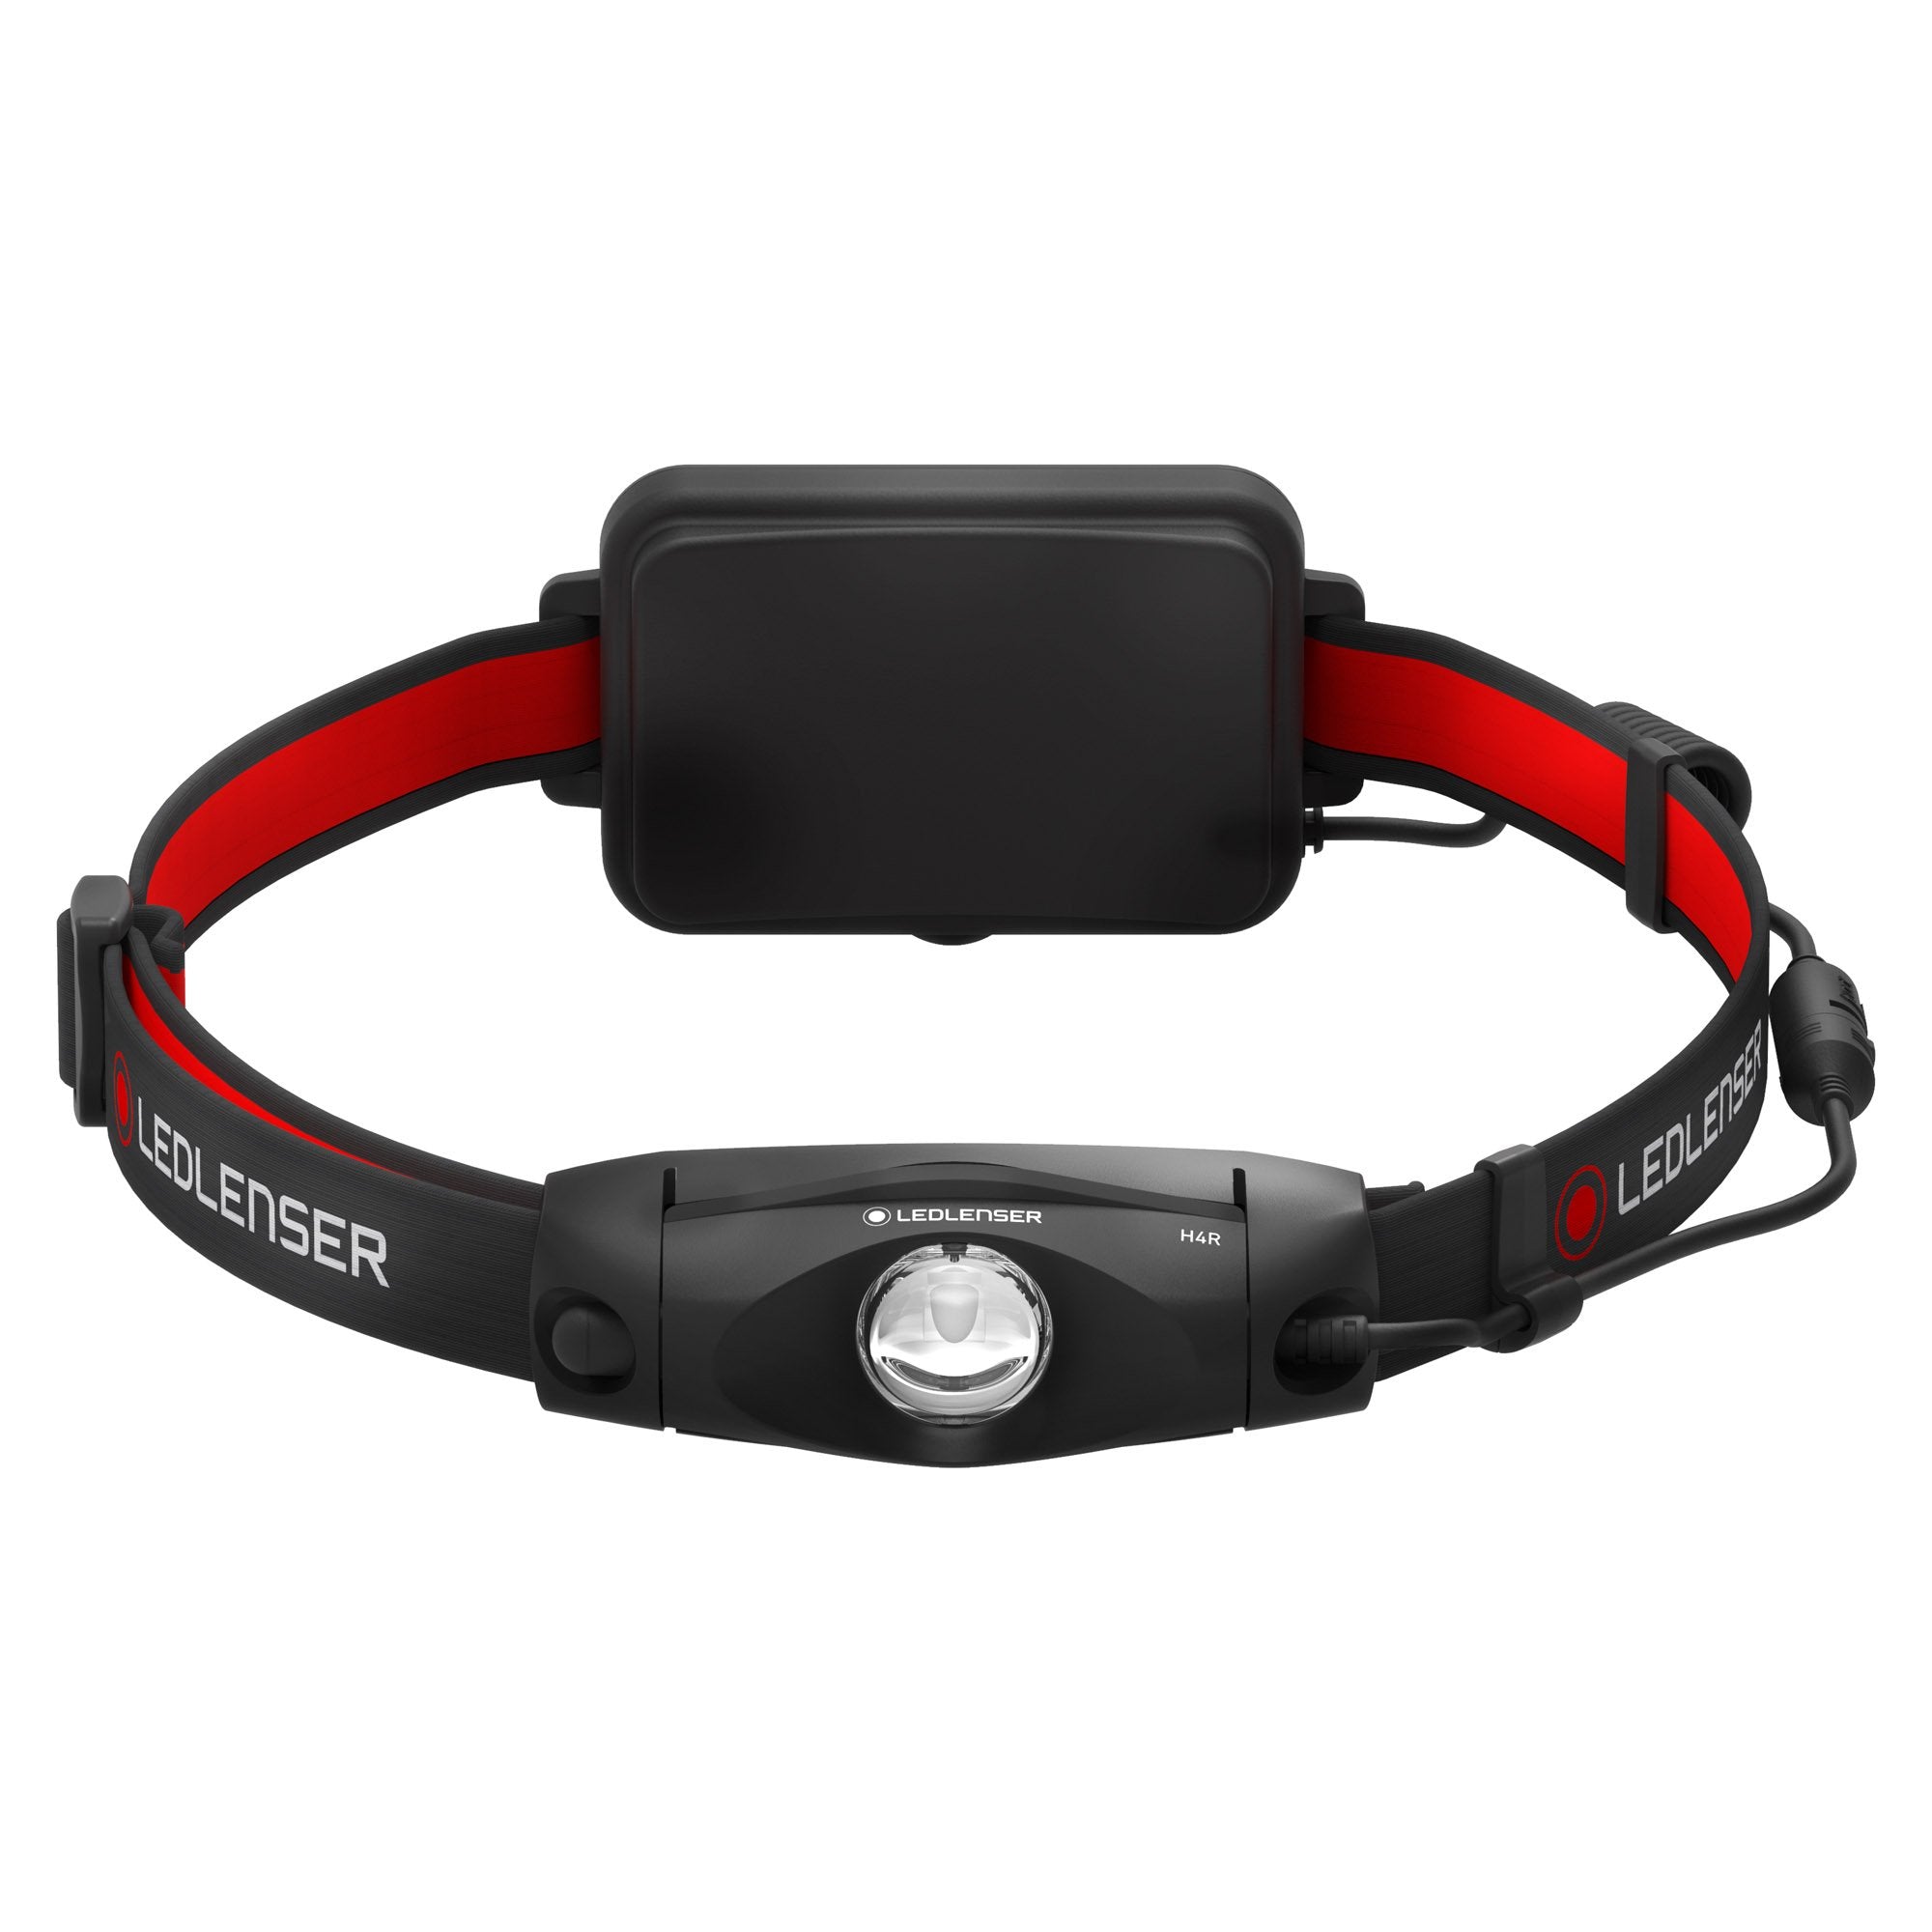 H4R Rechargeable Headlamp